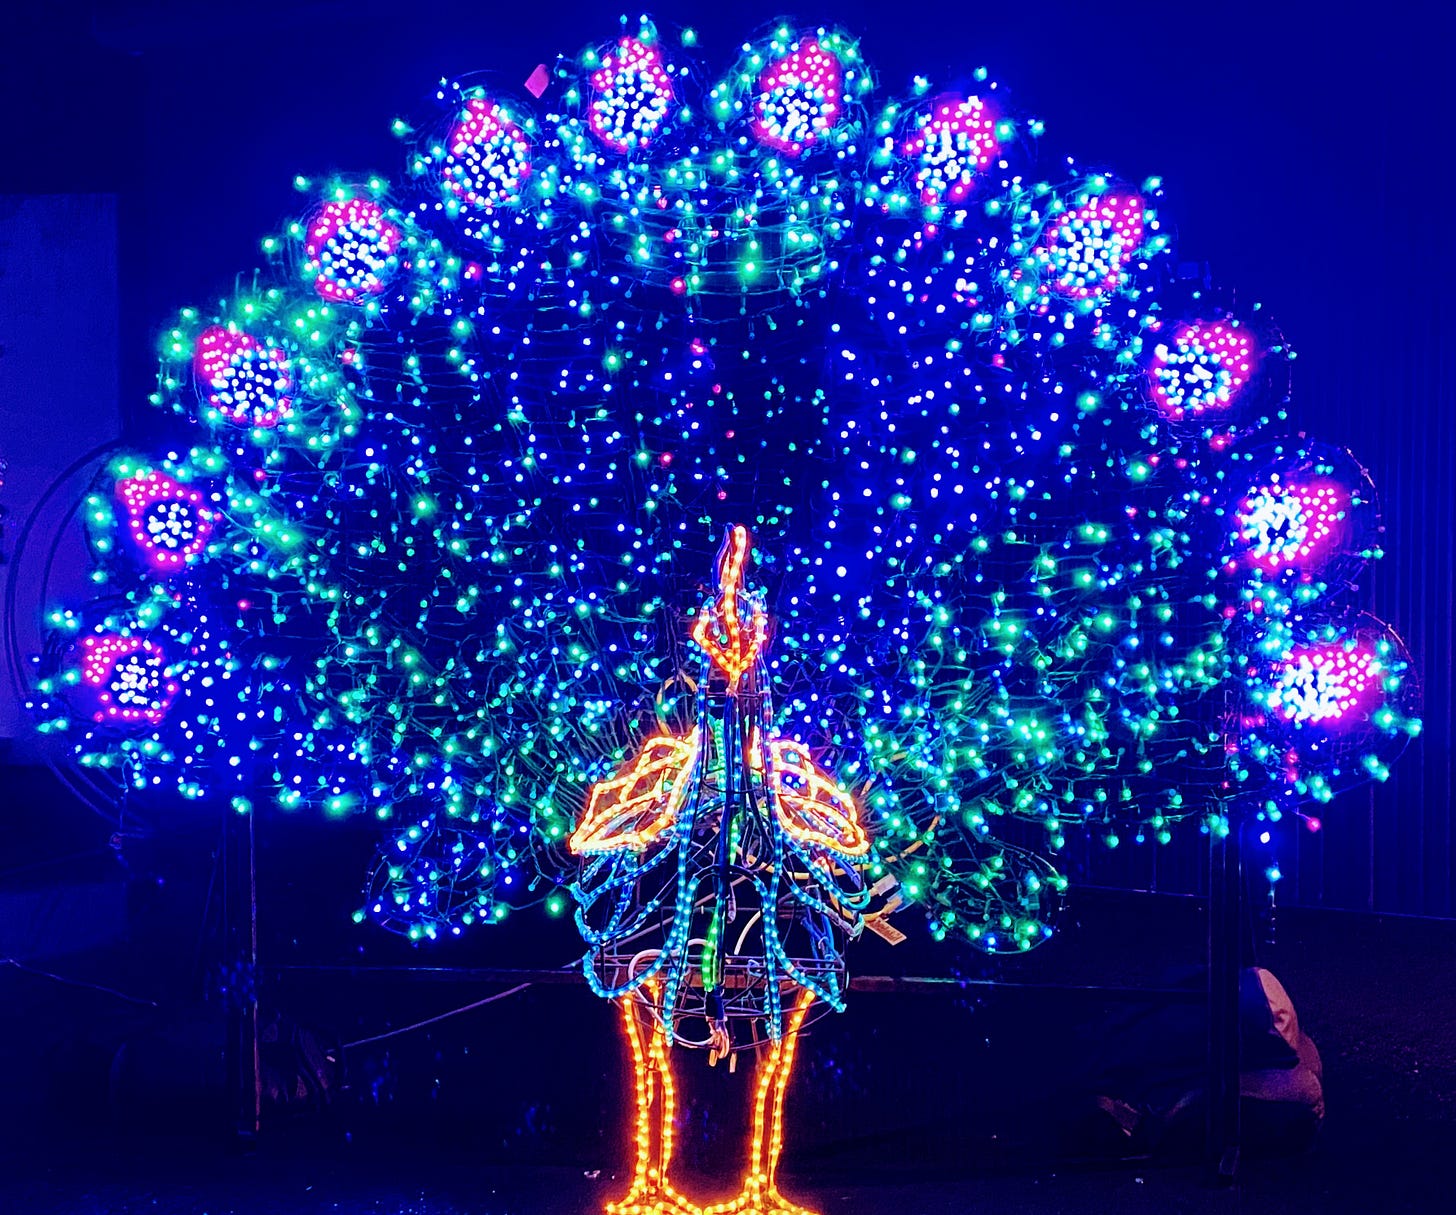 Peacock made of lights